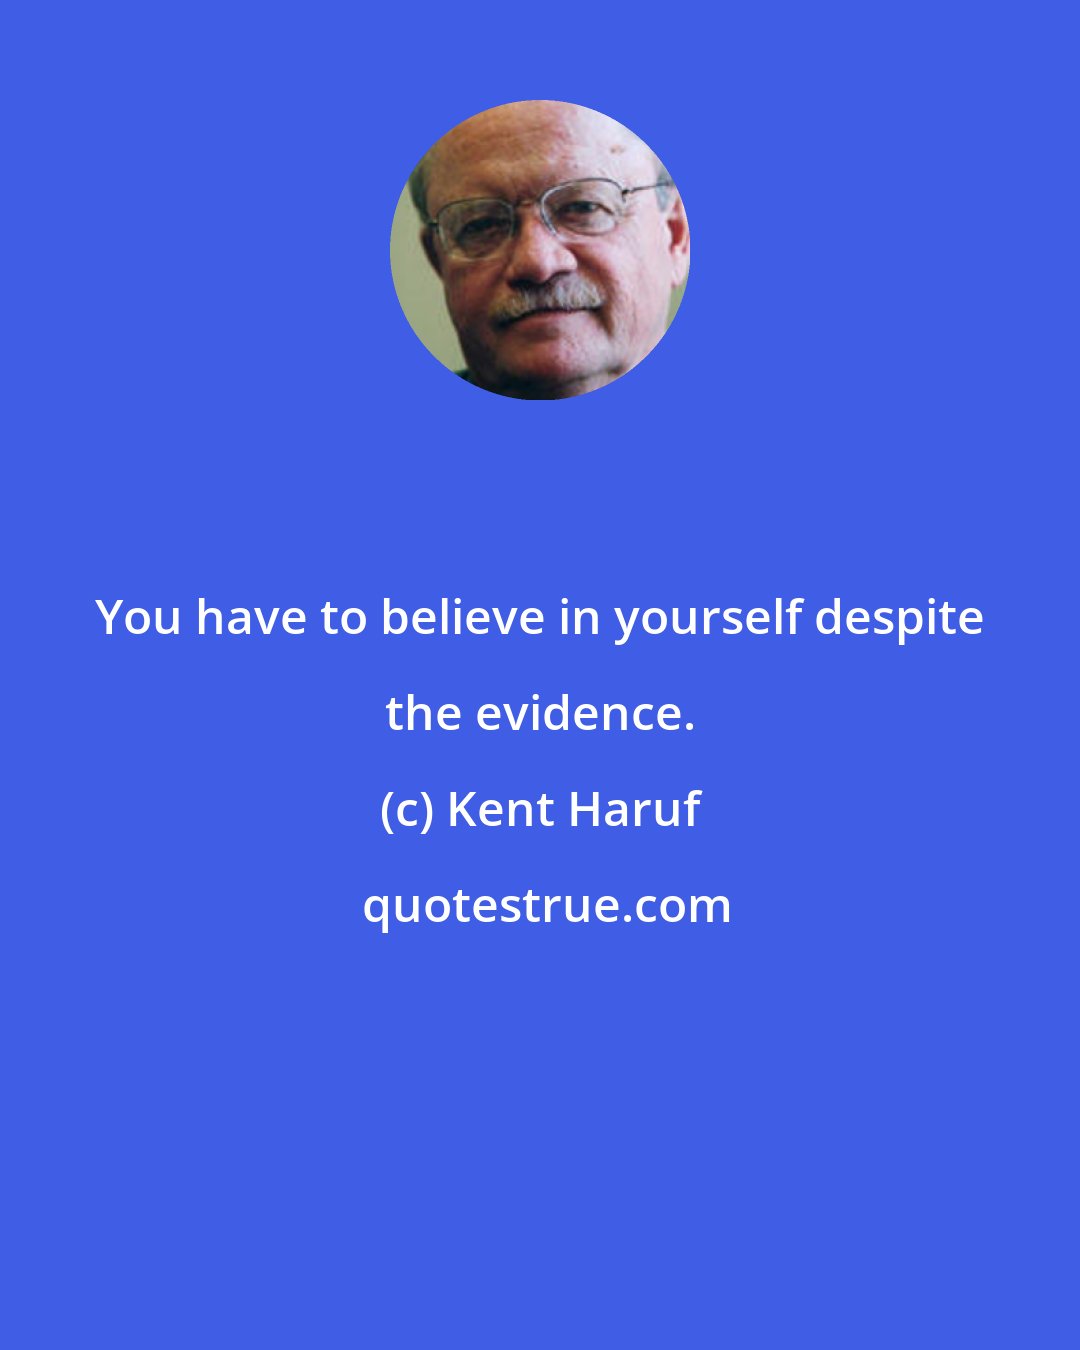 Kent Haruf: You have to believe in yourself despite the evidence.